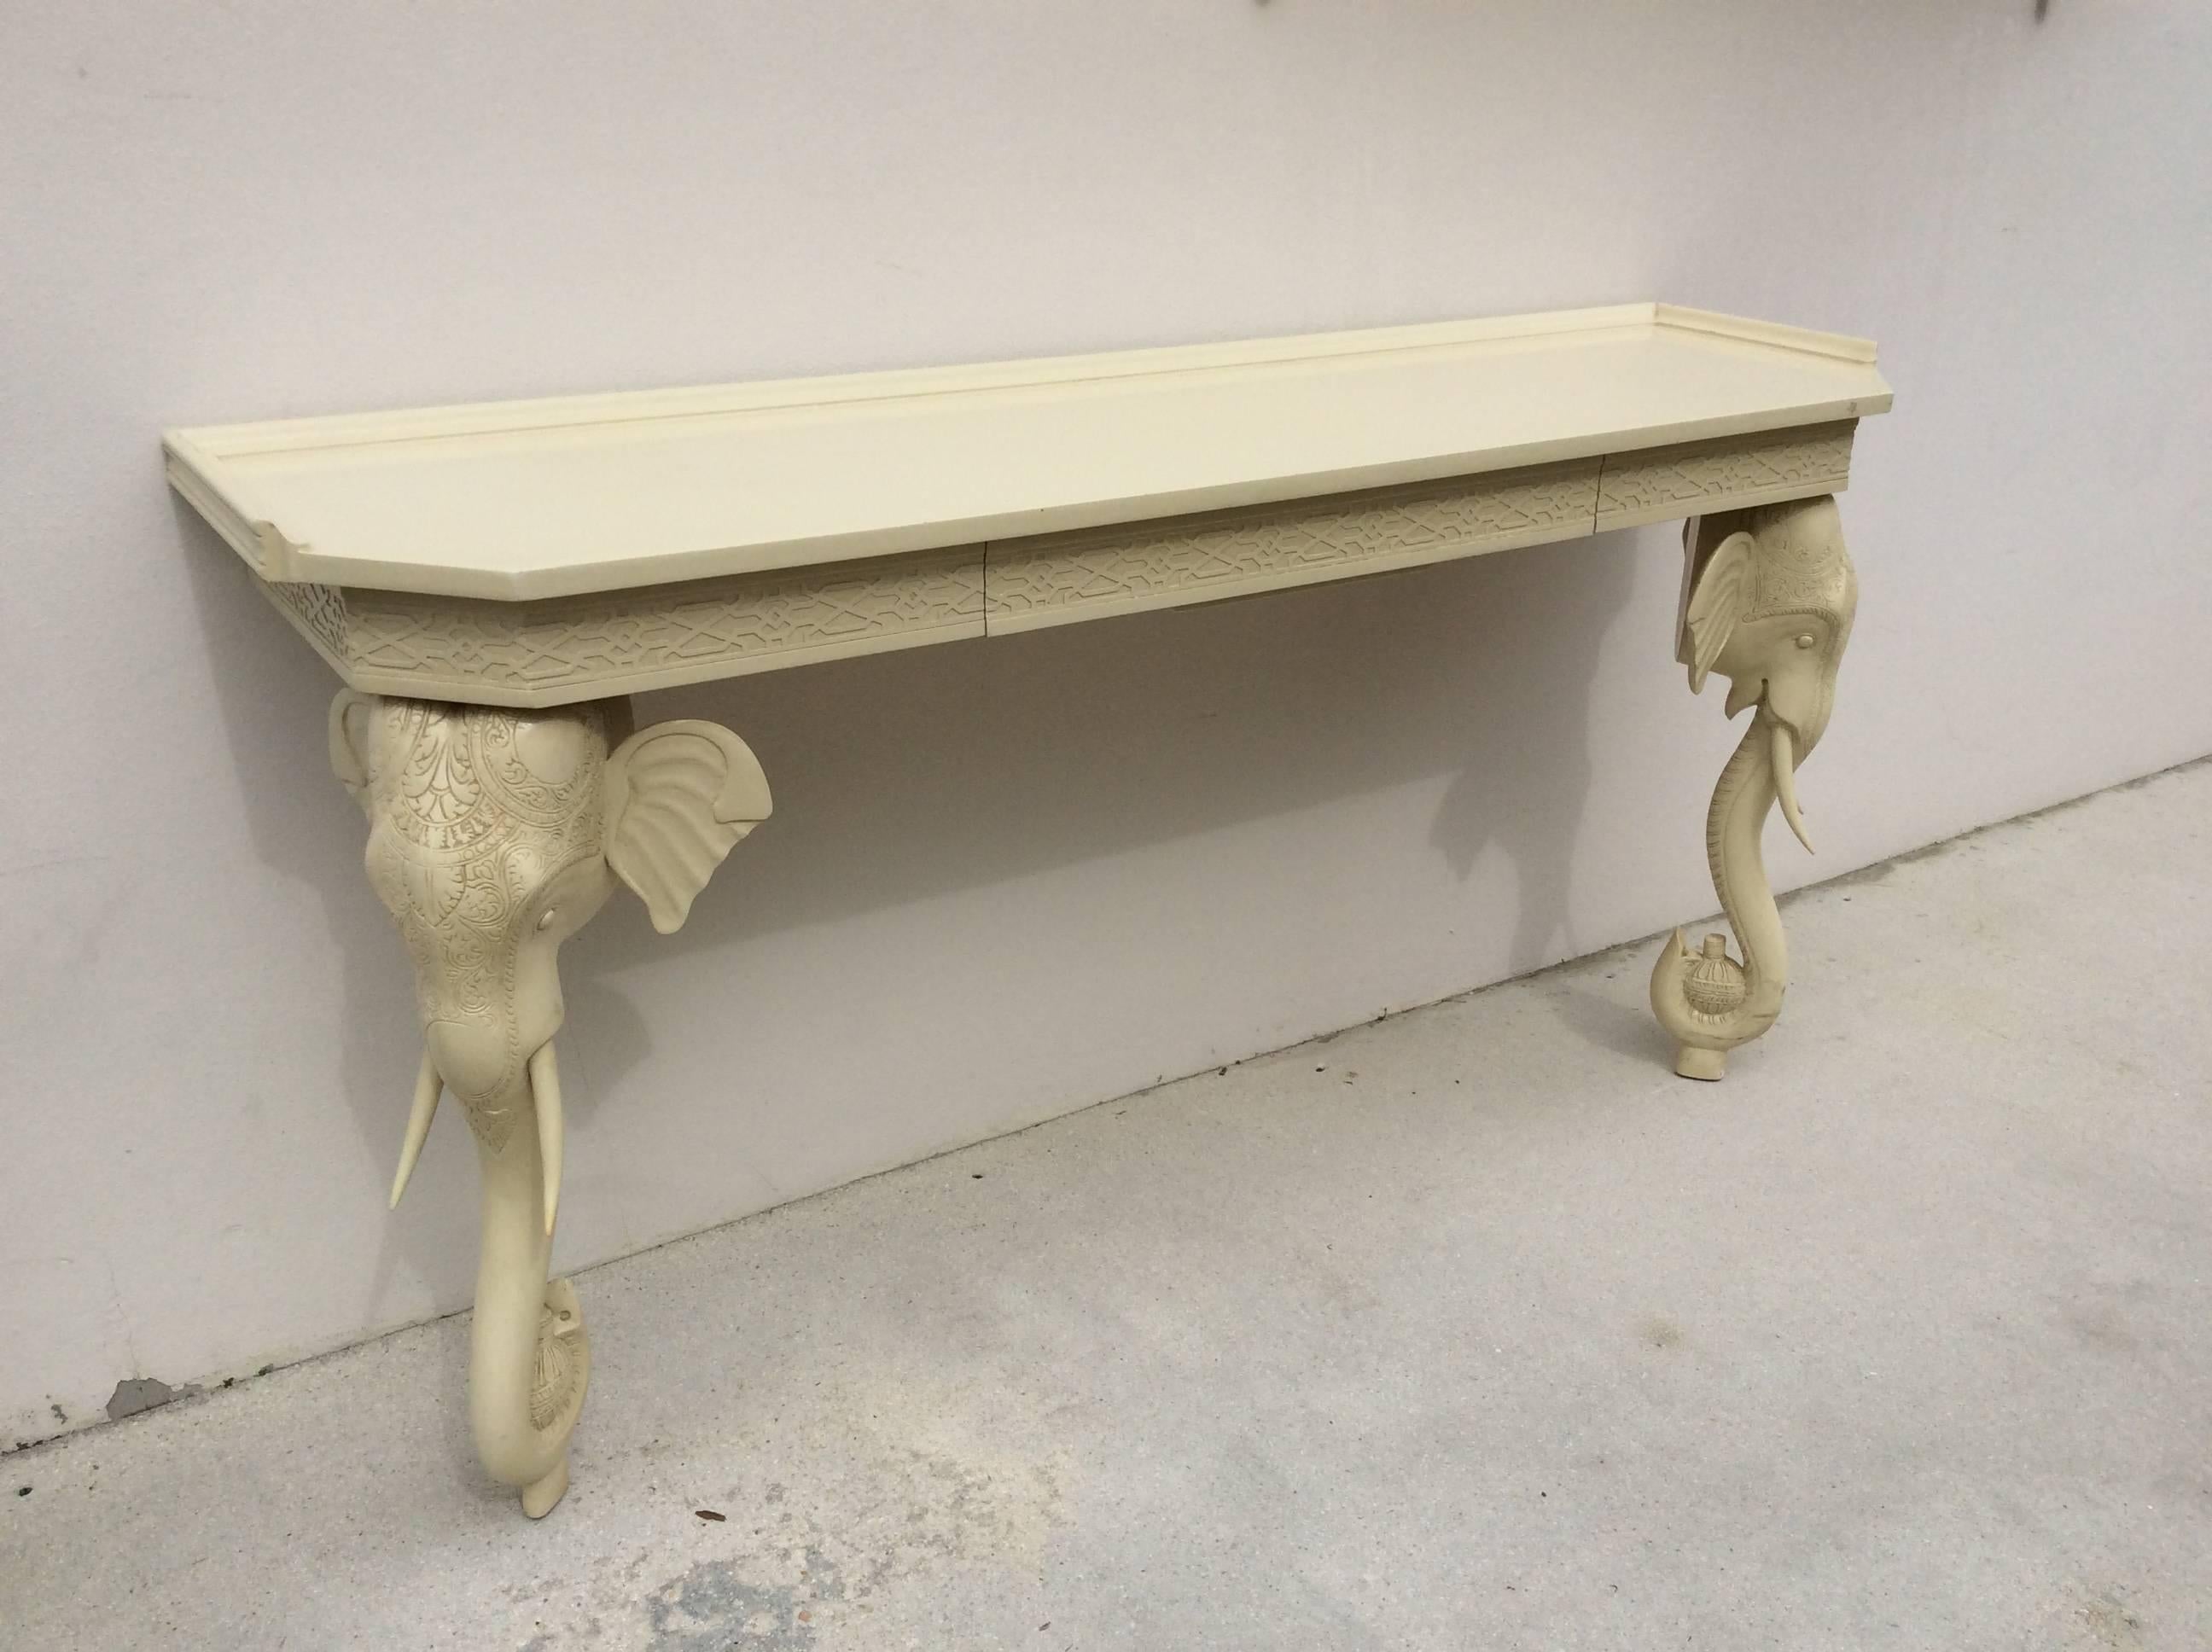 Vintage Gampel and Stoll Elephant Wall Console Table Desk Fretwork Chinoiserie  1